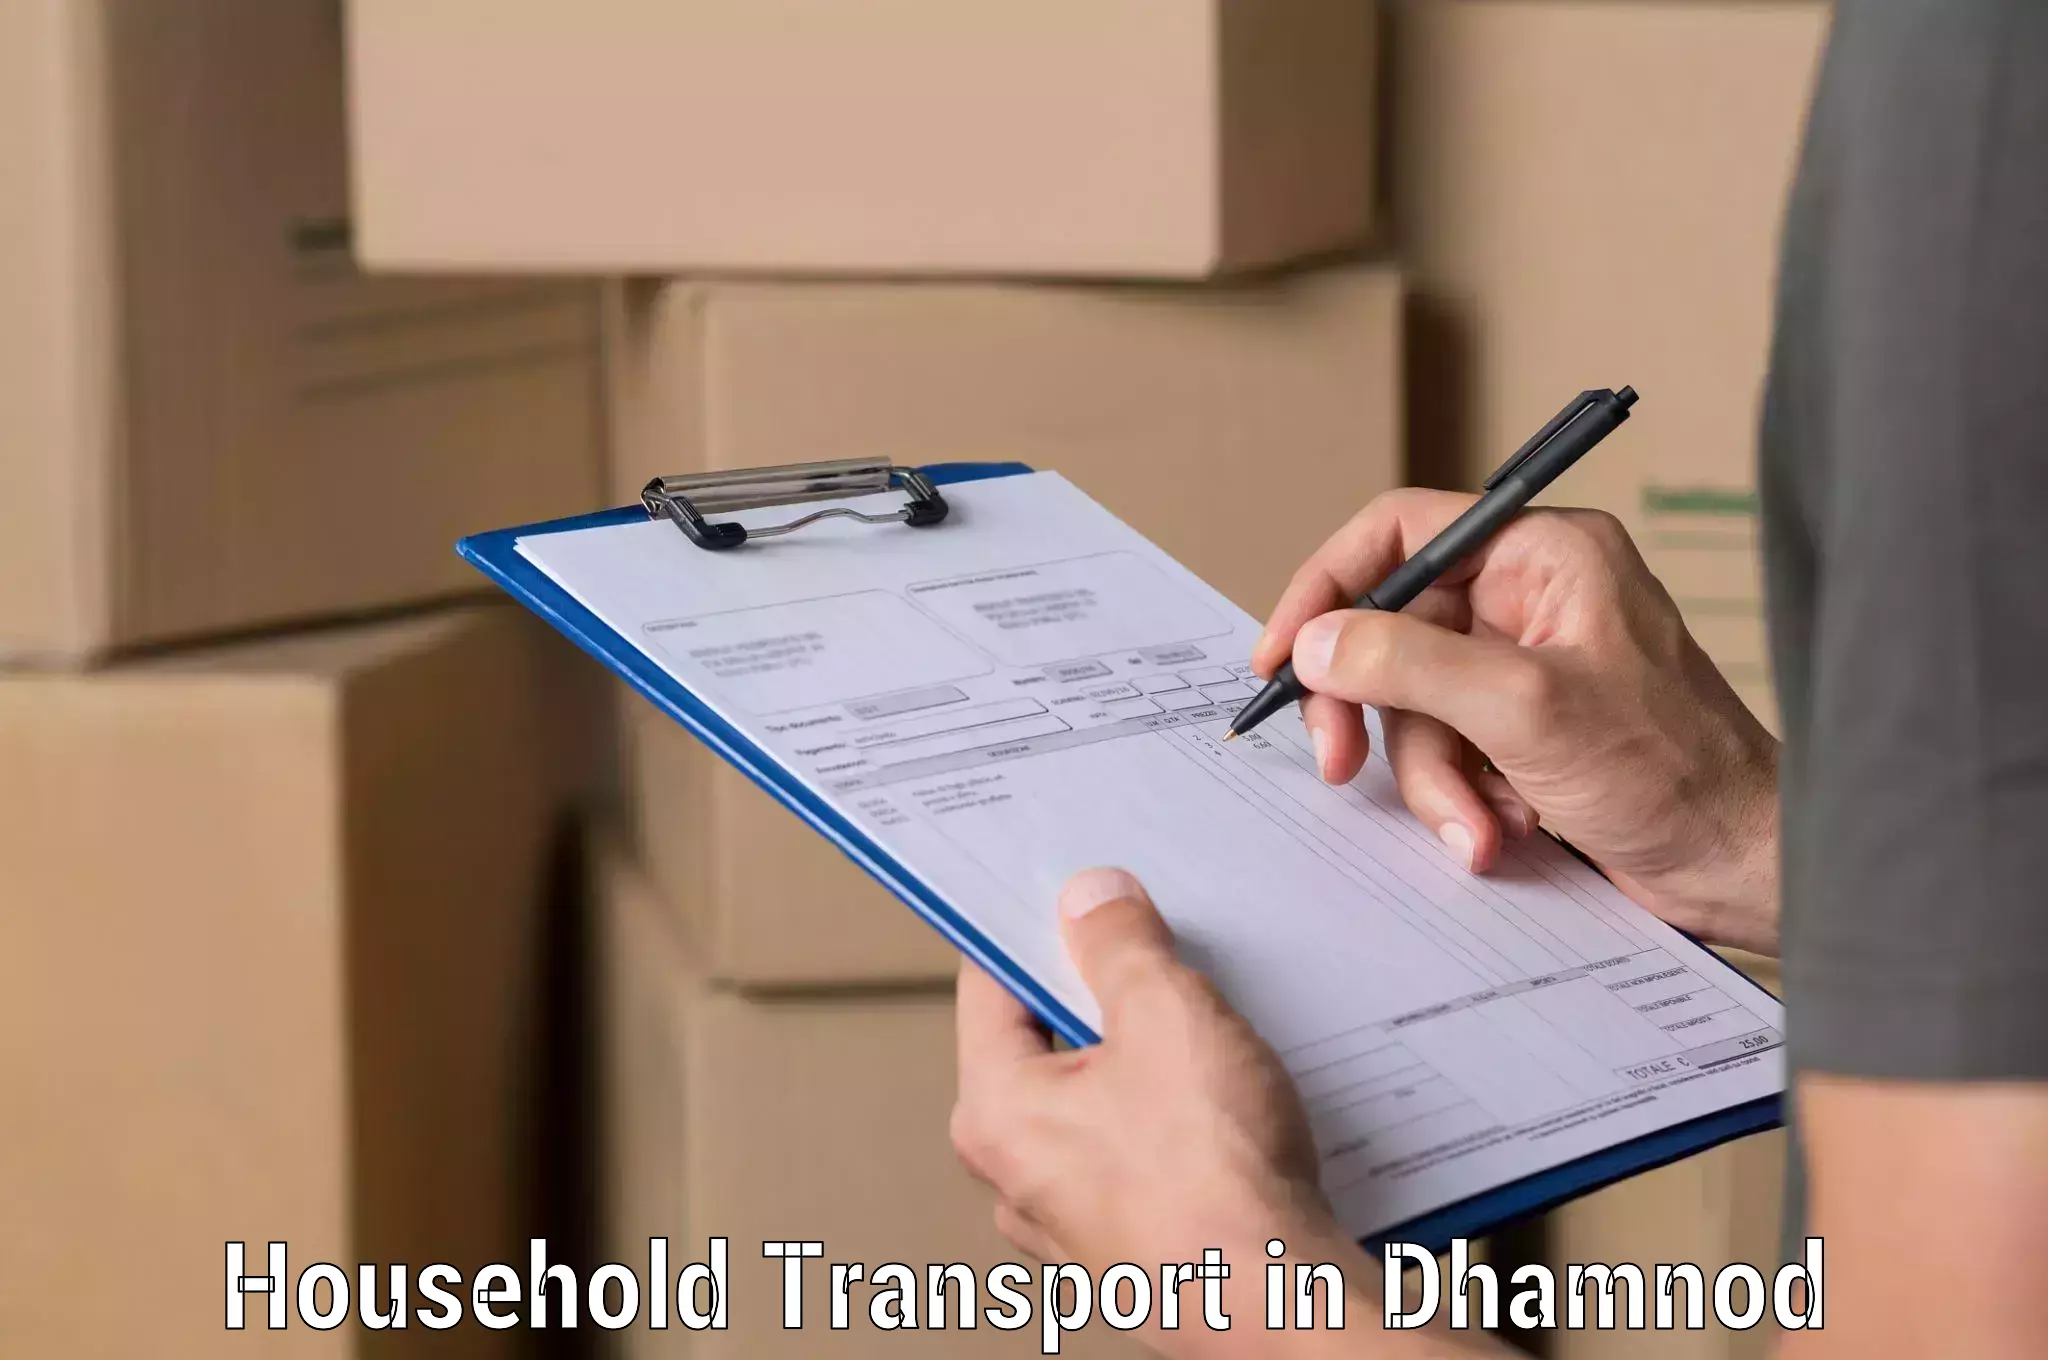 Reliable goods transport in Dhamnod